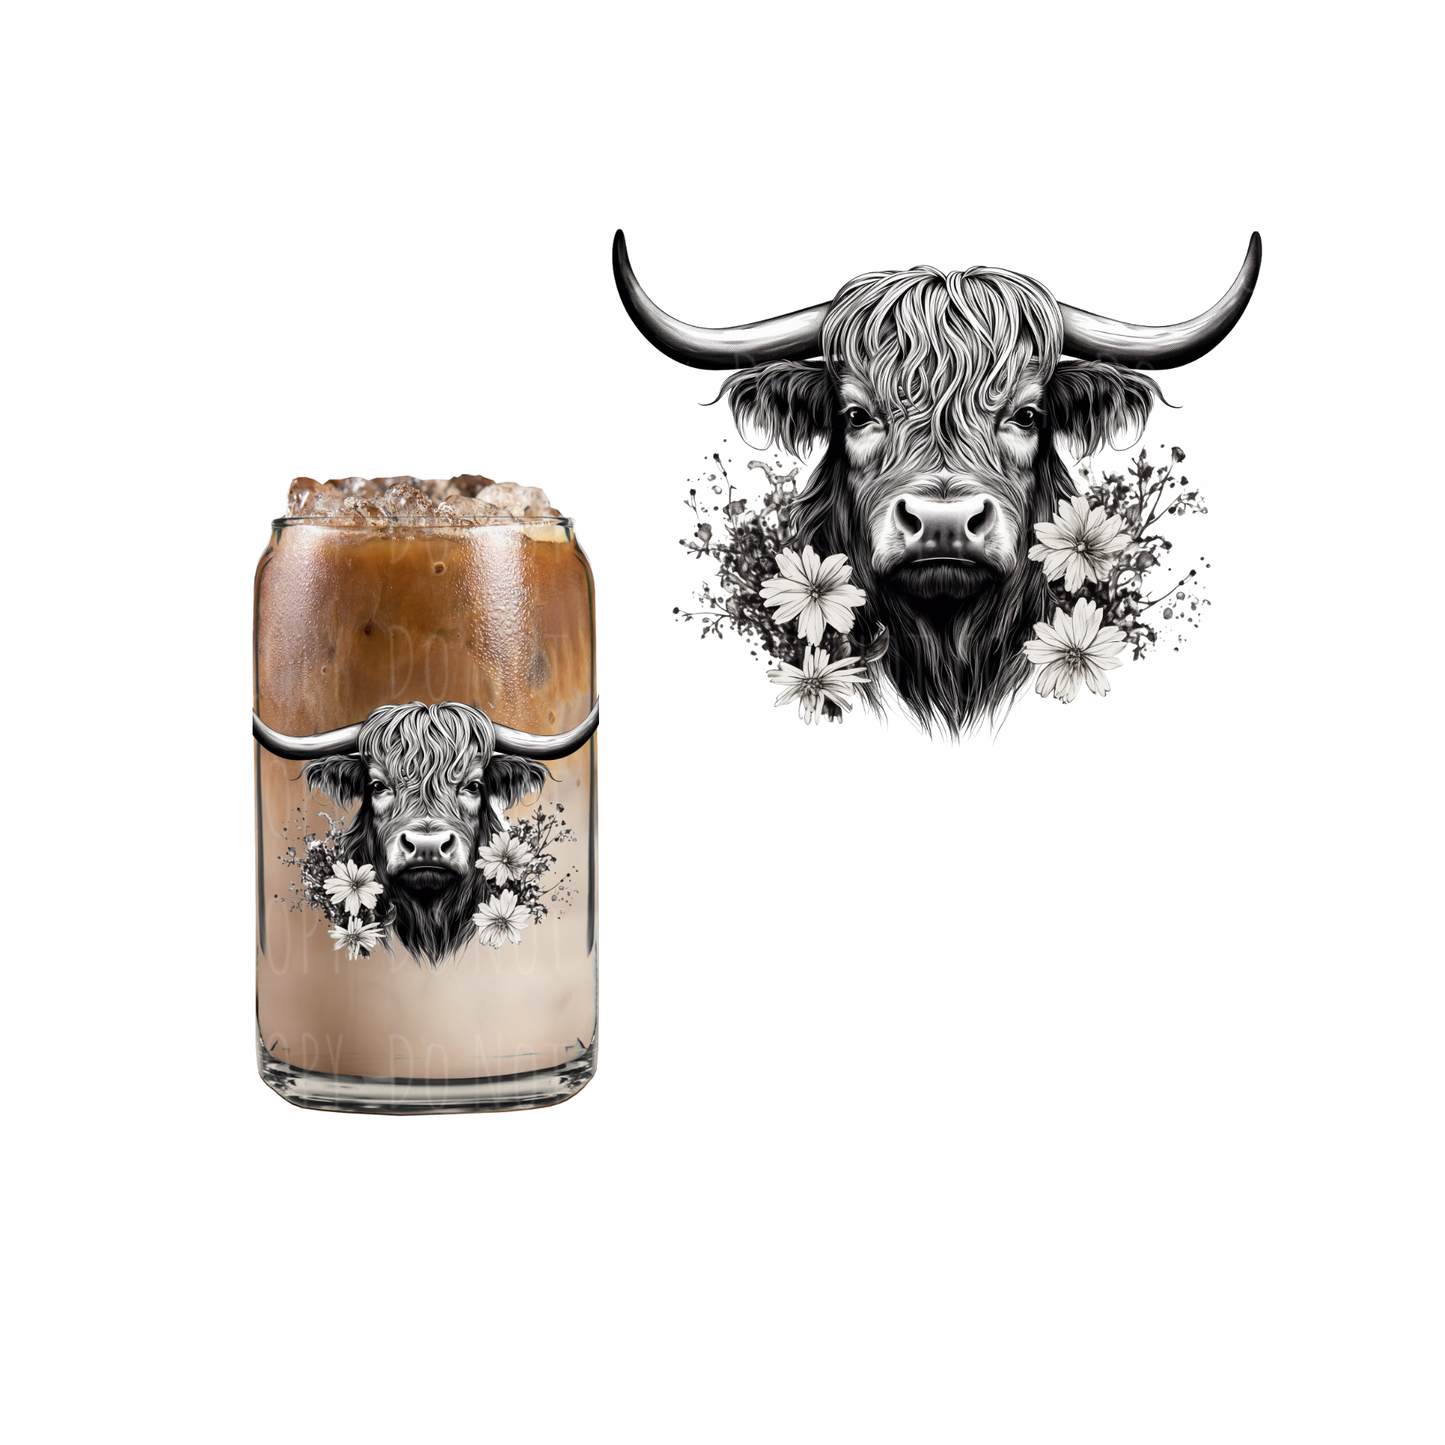 Black + White Highland Cow UVDTF decal